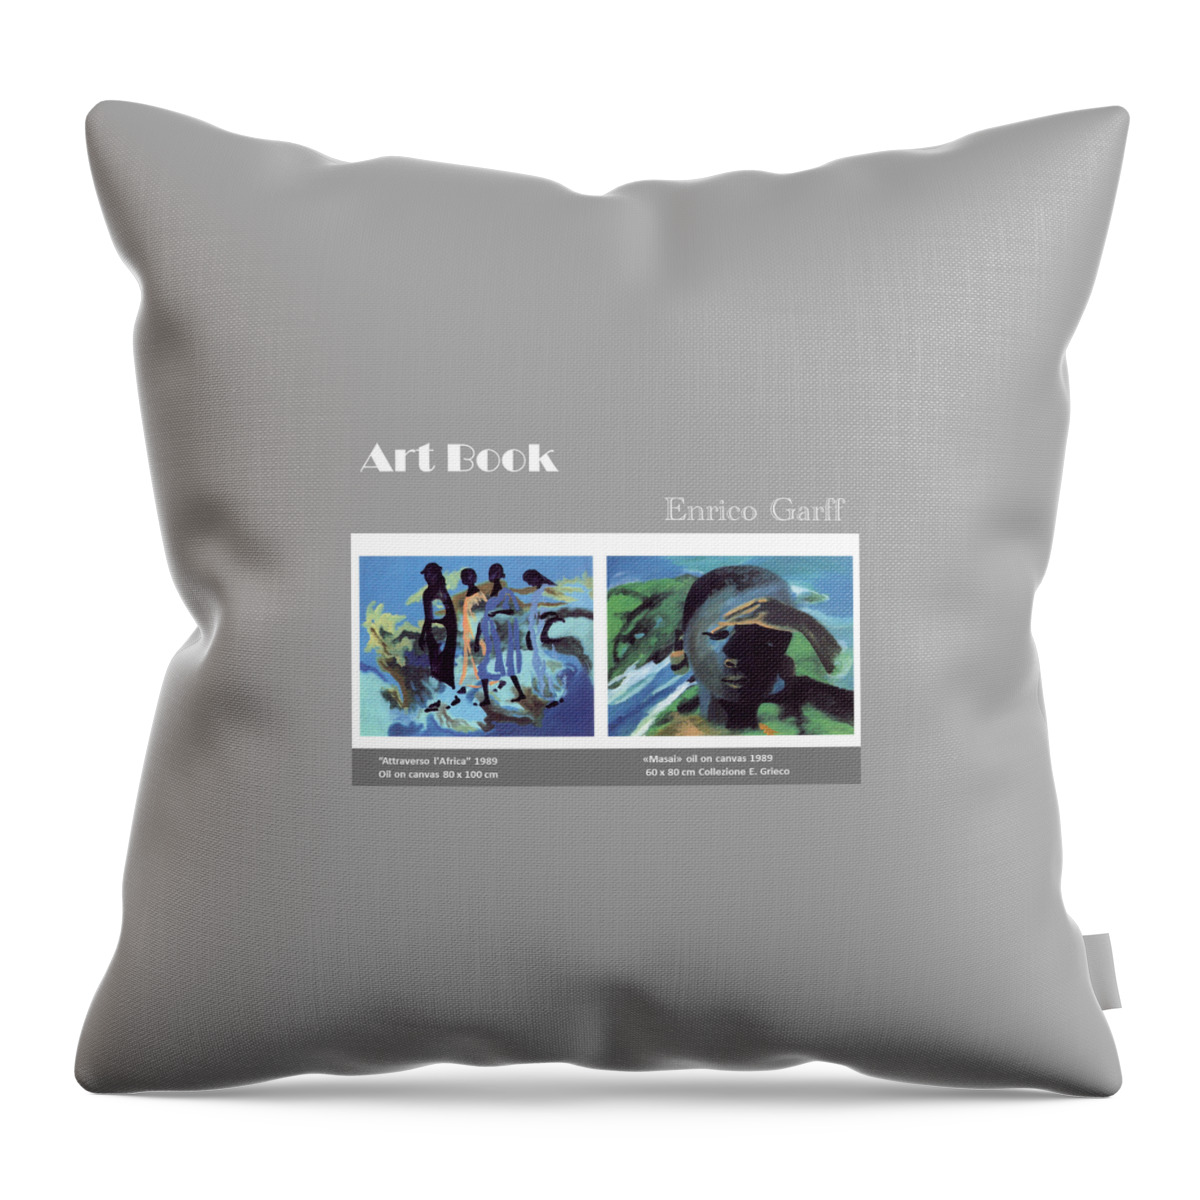 Africa Throw Pillow featuring the painting Art Book #8 by Enrico Garff